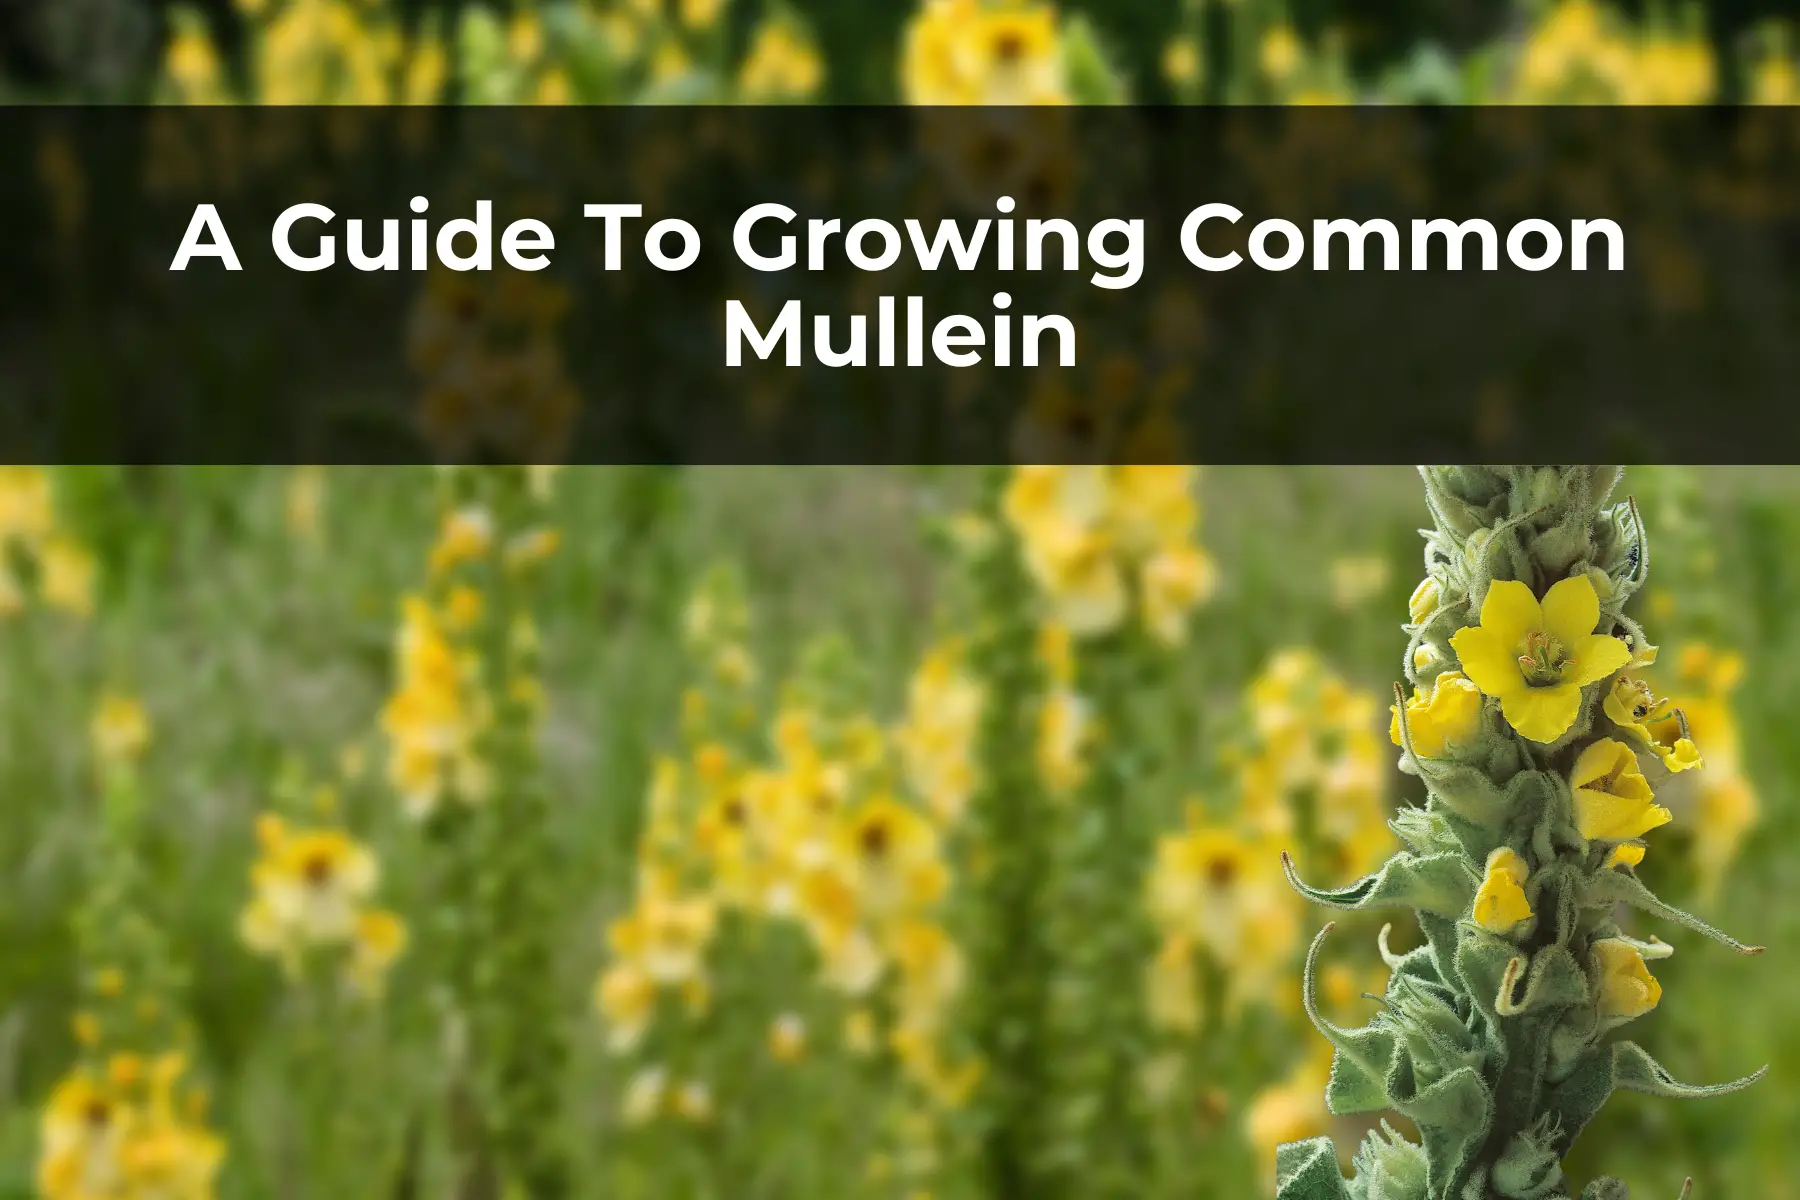 A Guide To Growing Common Mullein